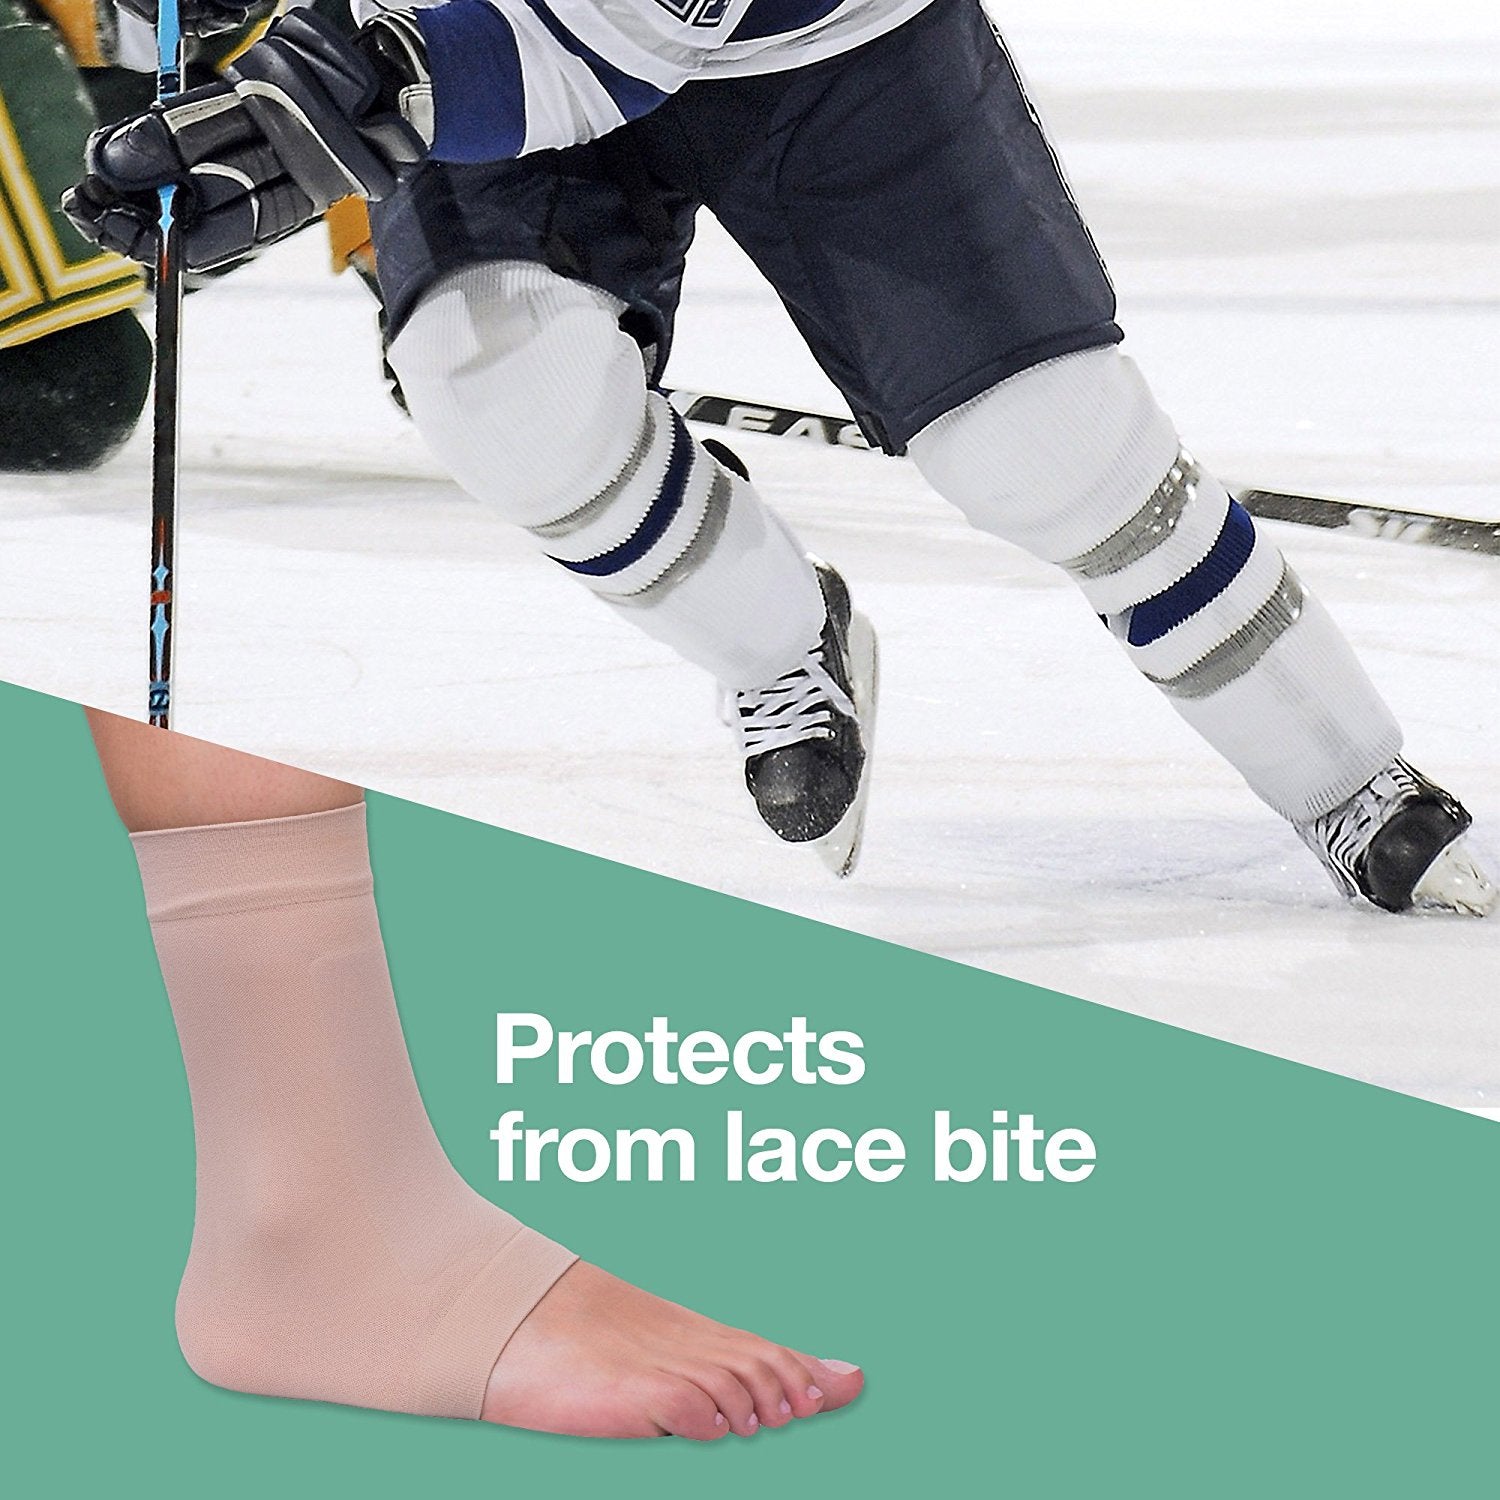 How to Fix Lace Bite With Hockey Skates: 3 Steps (with Pictures)